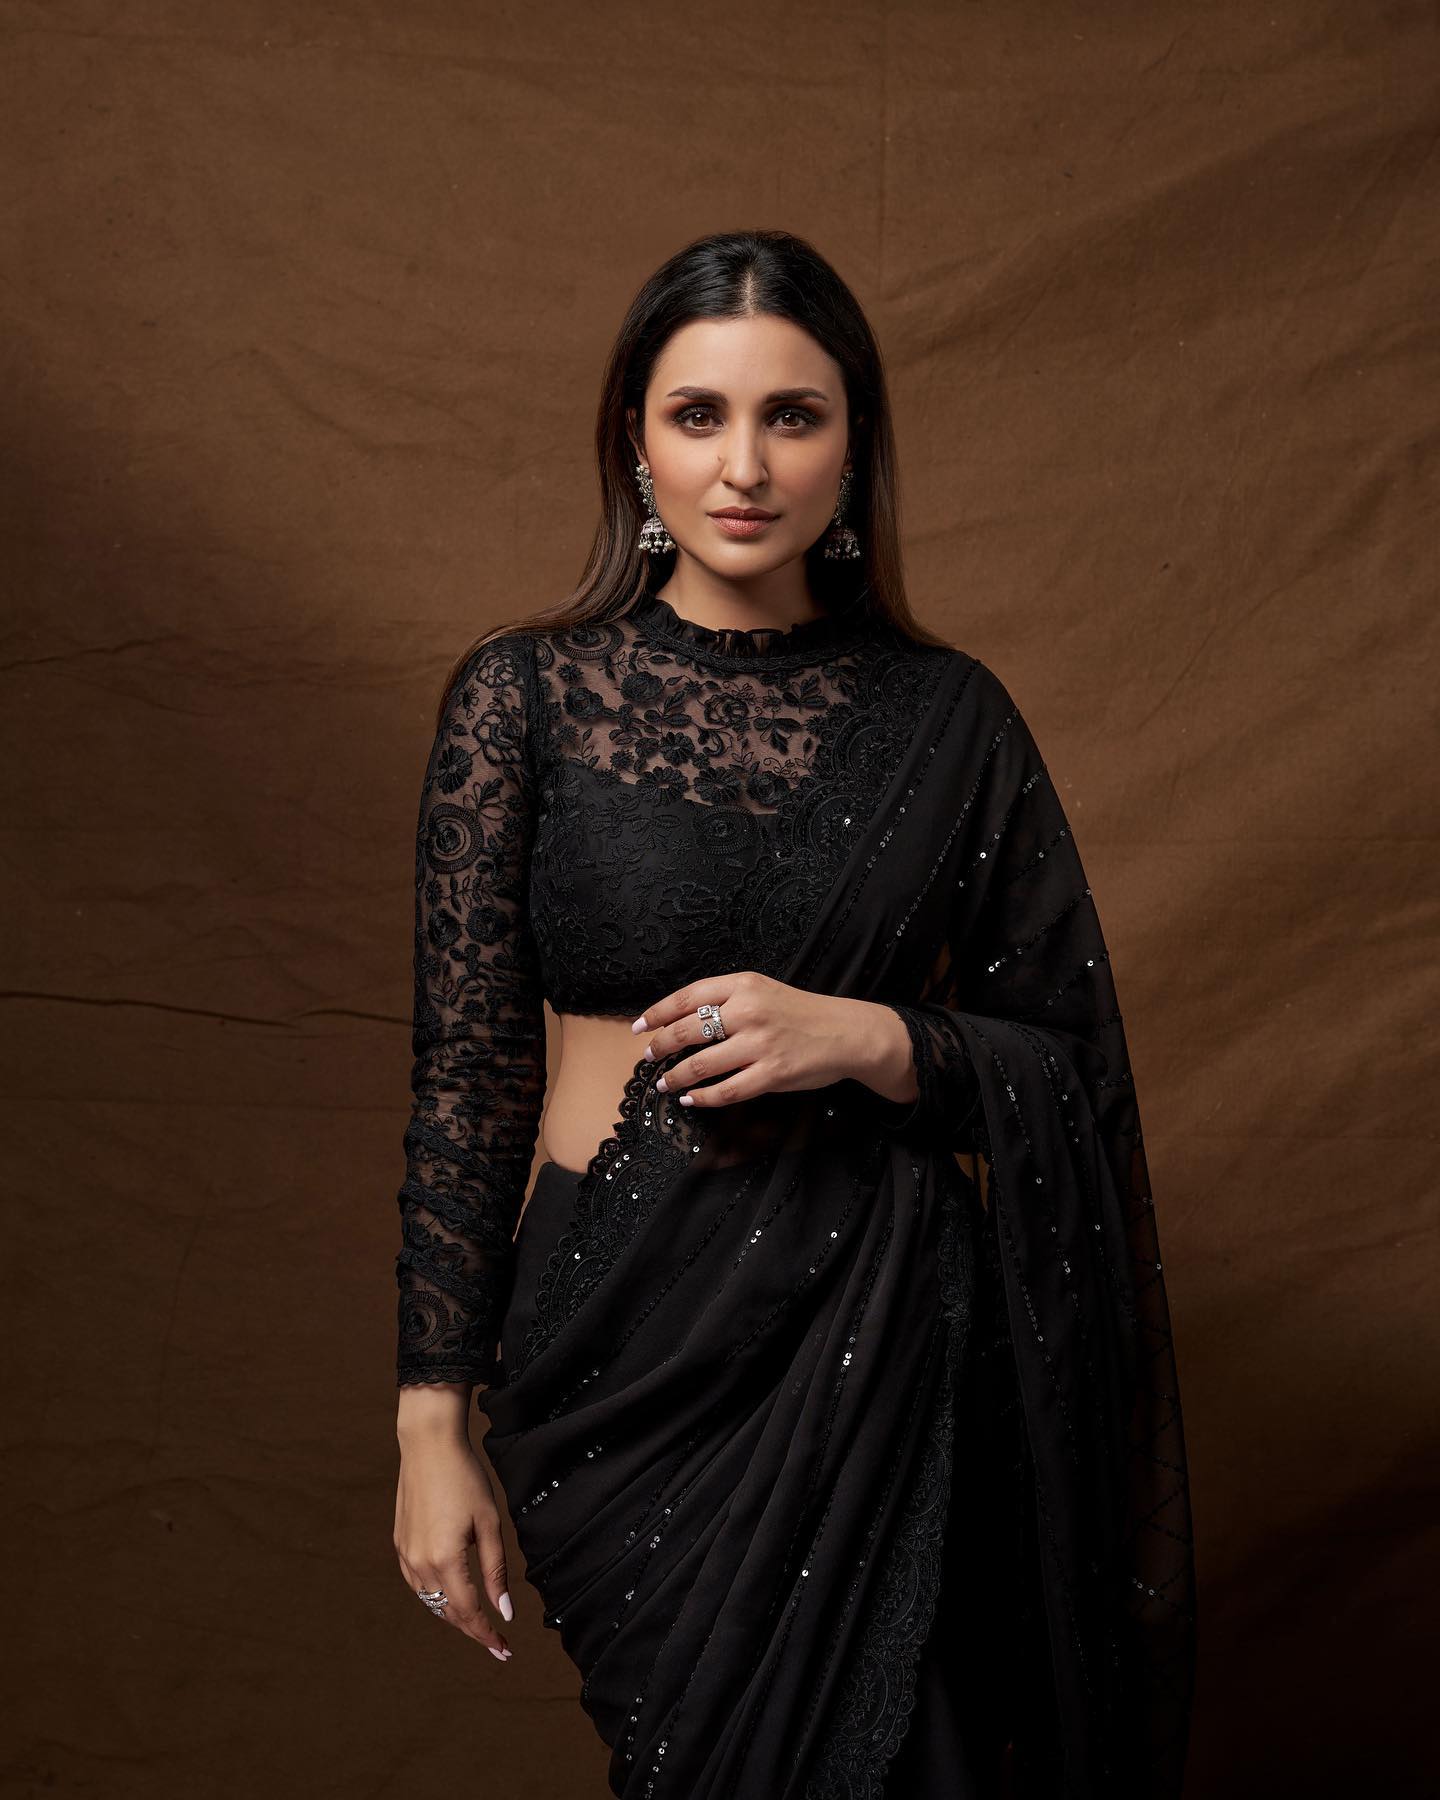 Mouni Roy Looks Stunning in Black Saree and Noodle Strap Blouse at Lion  Gold Awards 2019! See Pics of Hot Actress | 👗 LatestLY